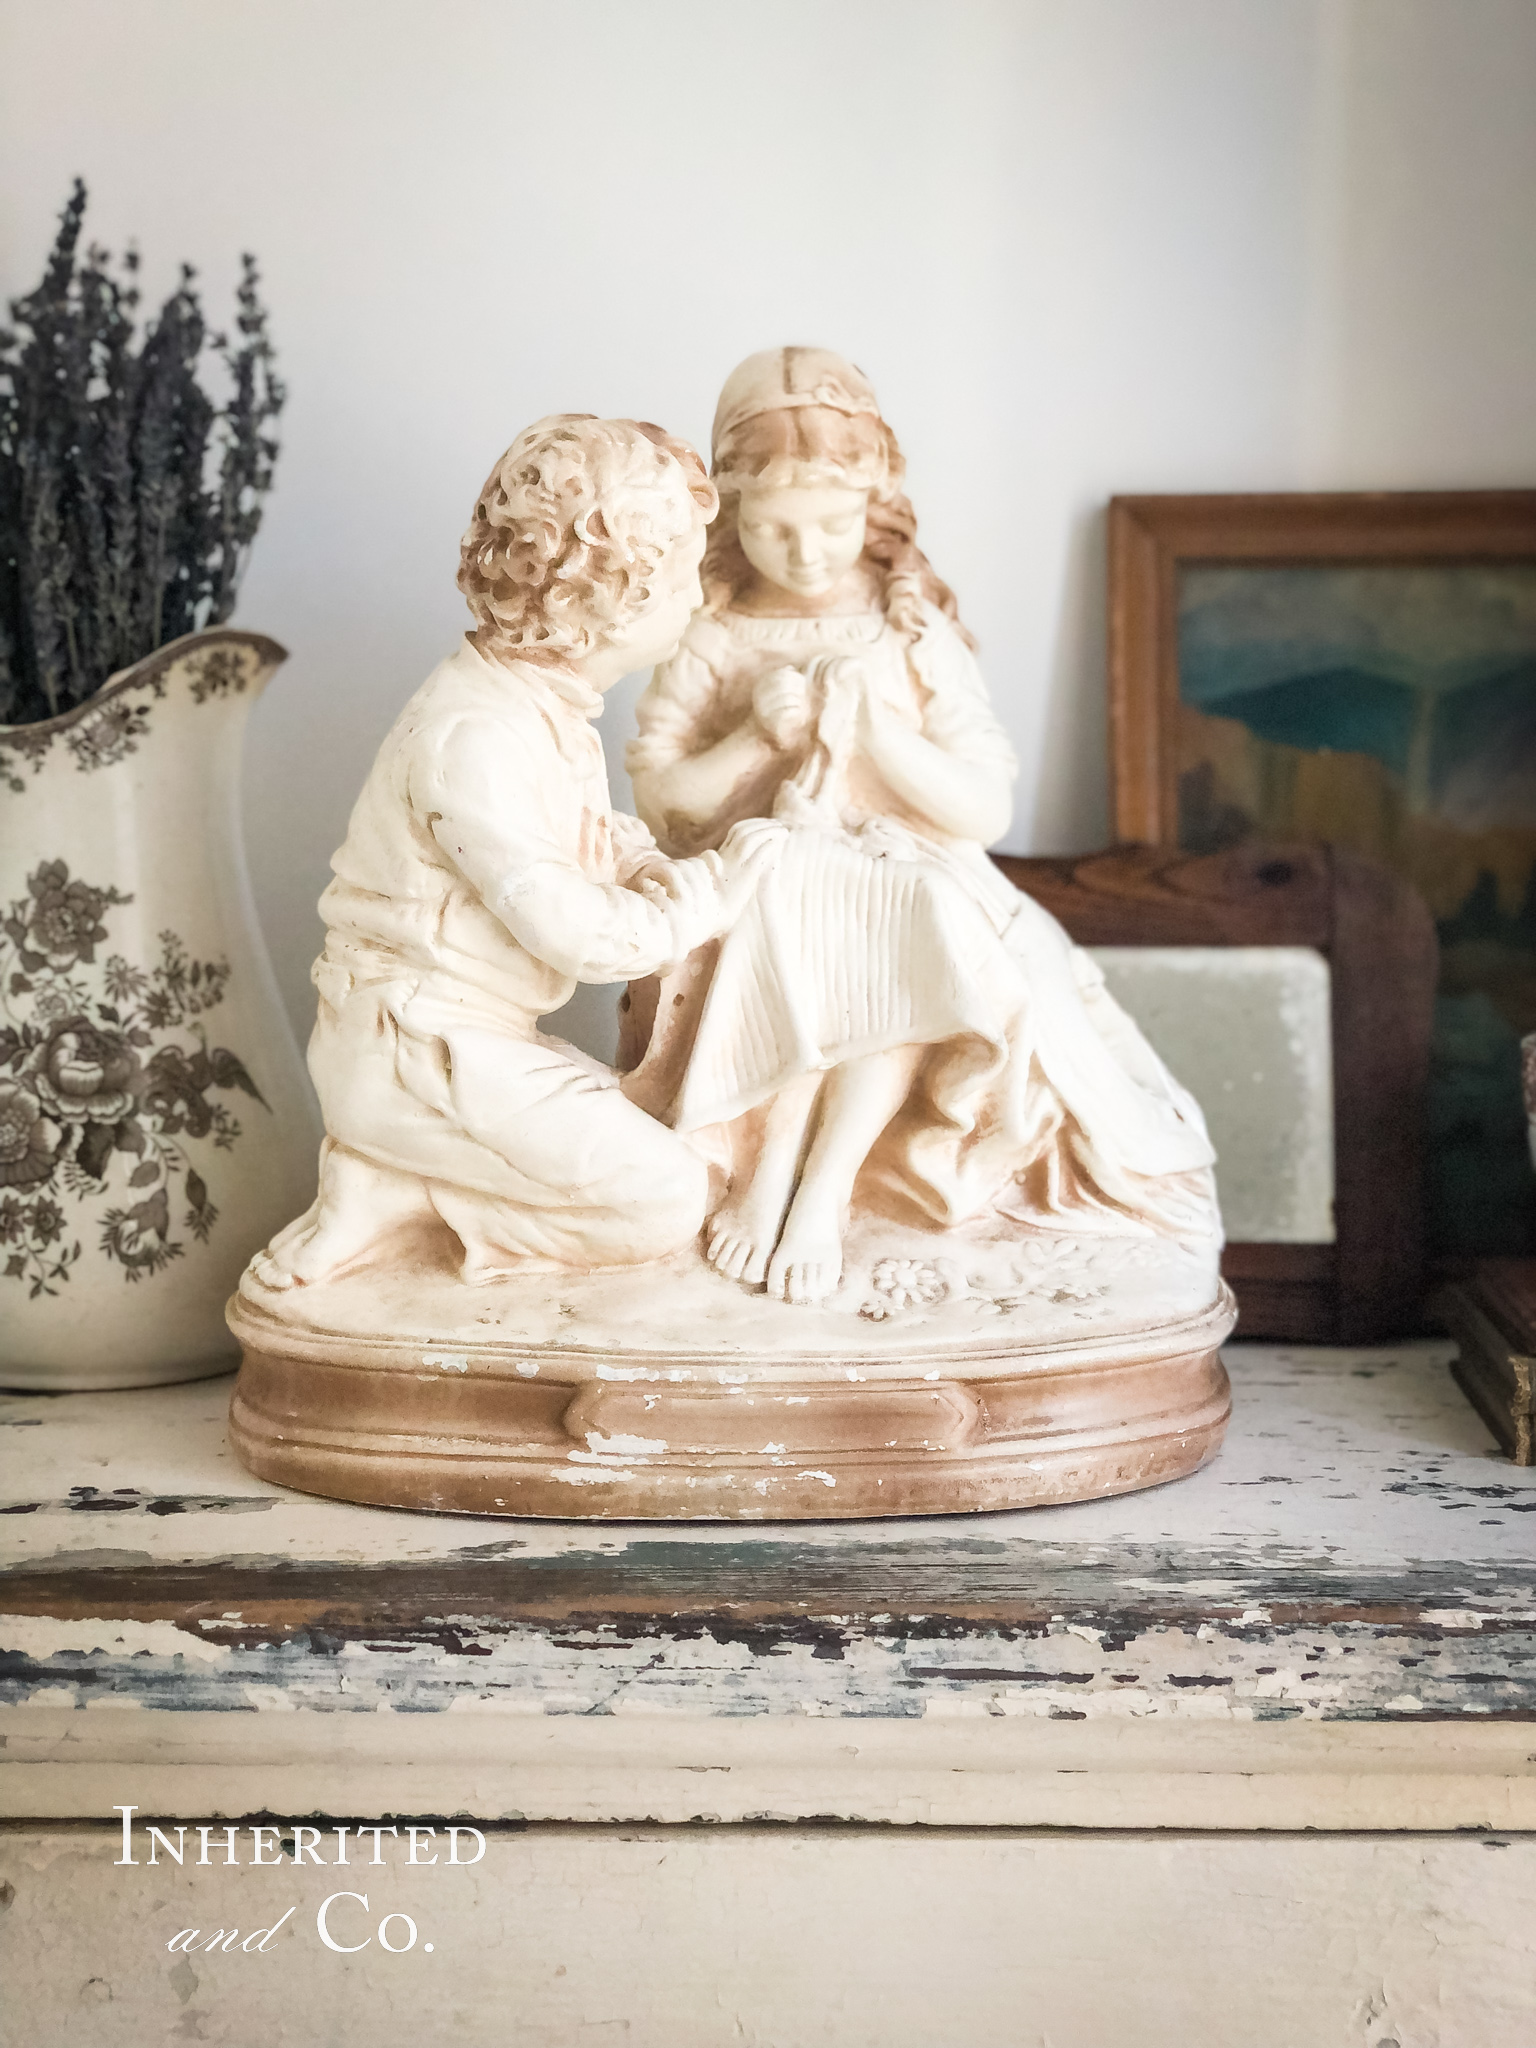 Vintage French sculpture in foreground of an antique vignette